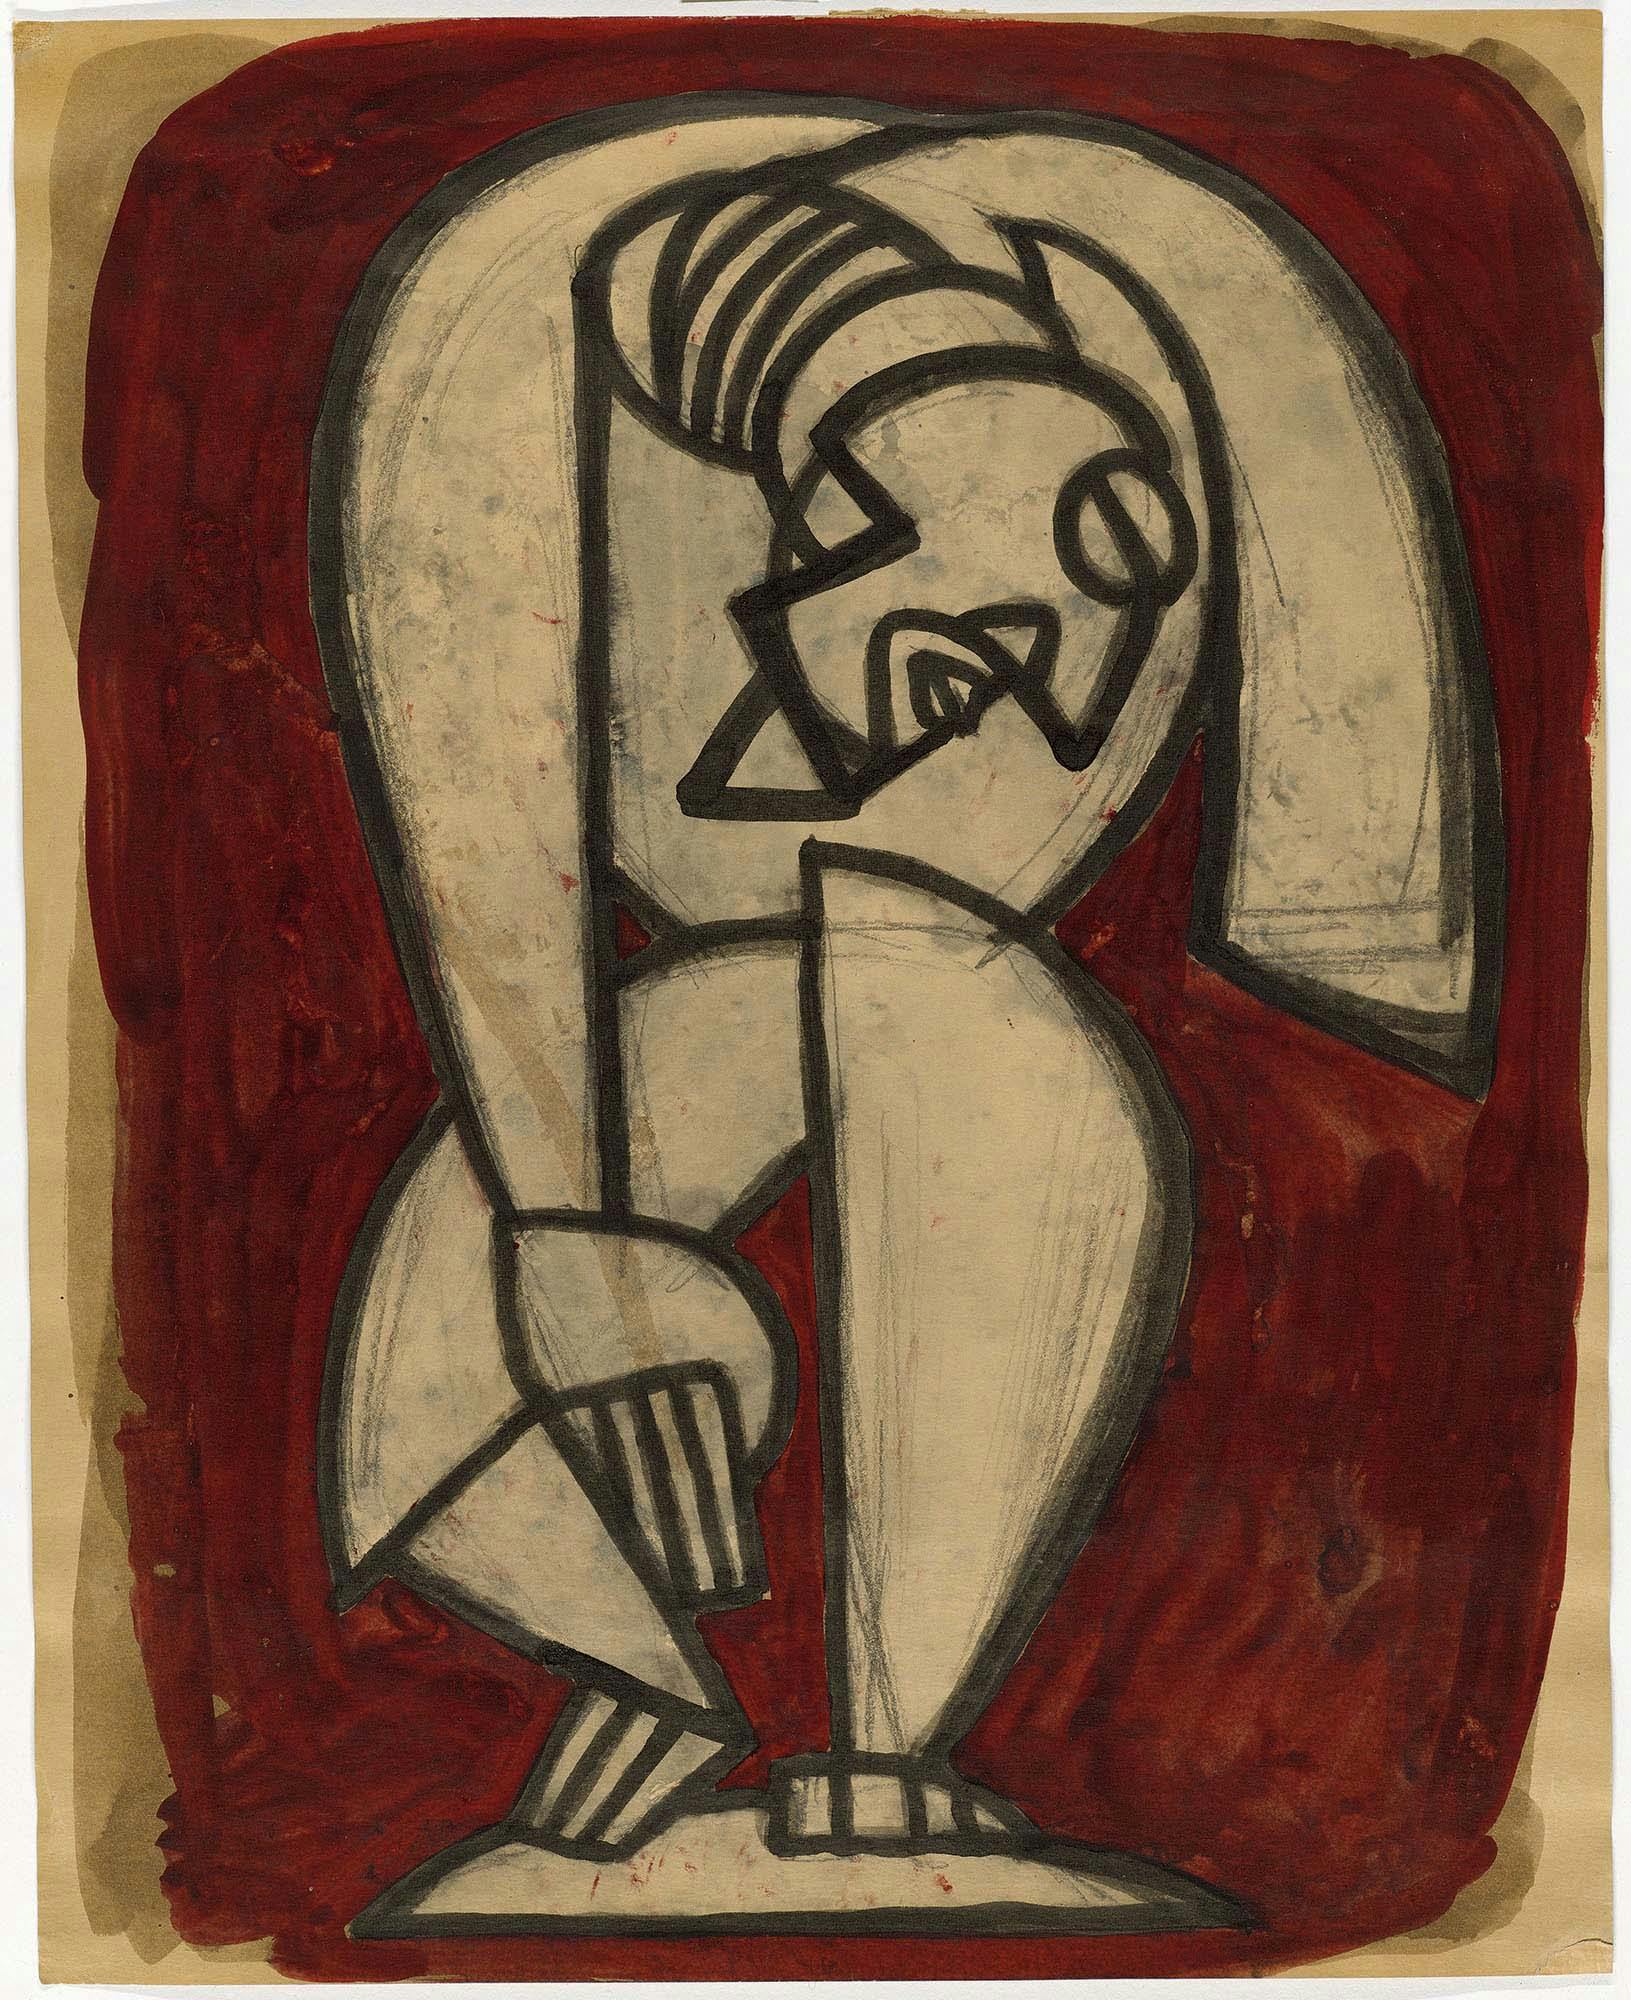 Agony
1930s
Graphite ink, and wash on paper
18 1/2 x 14 7/8 in. (47 x 37.8 cm)
 – The Richard Pousette-Dart Foundation